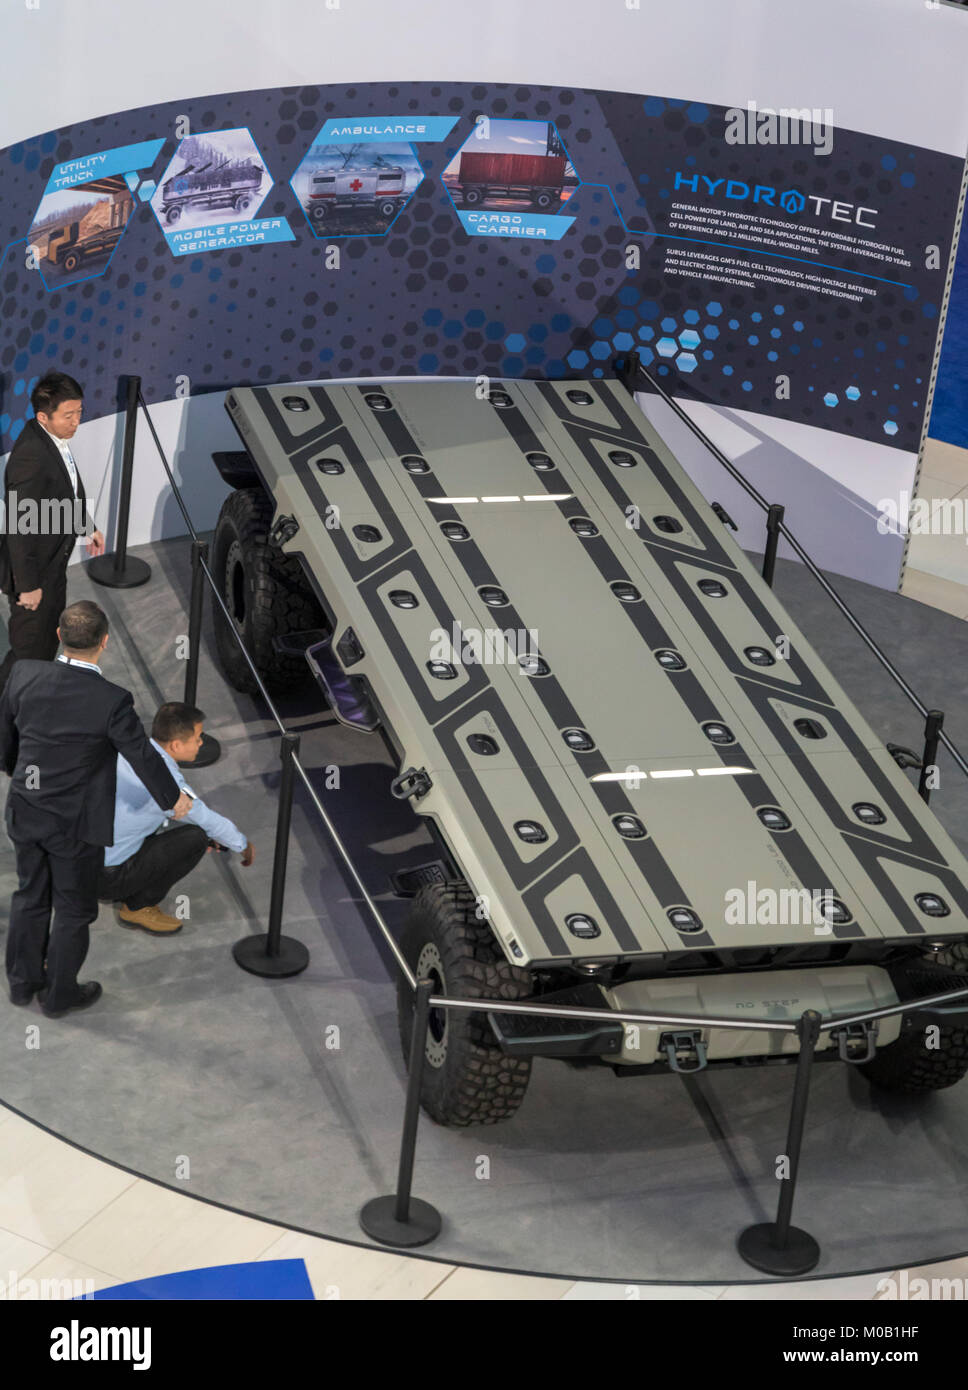 Detroit, Michigan - General Motors Hydrotec platform on display at the North American International Auto Show. The technology includes hydrogen fuel c Stock Photo